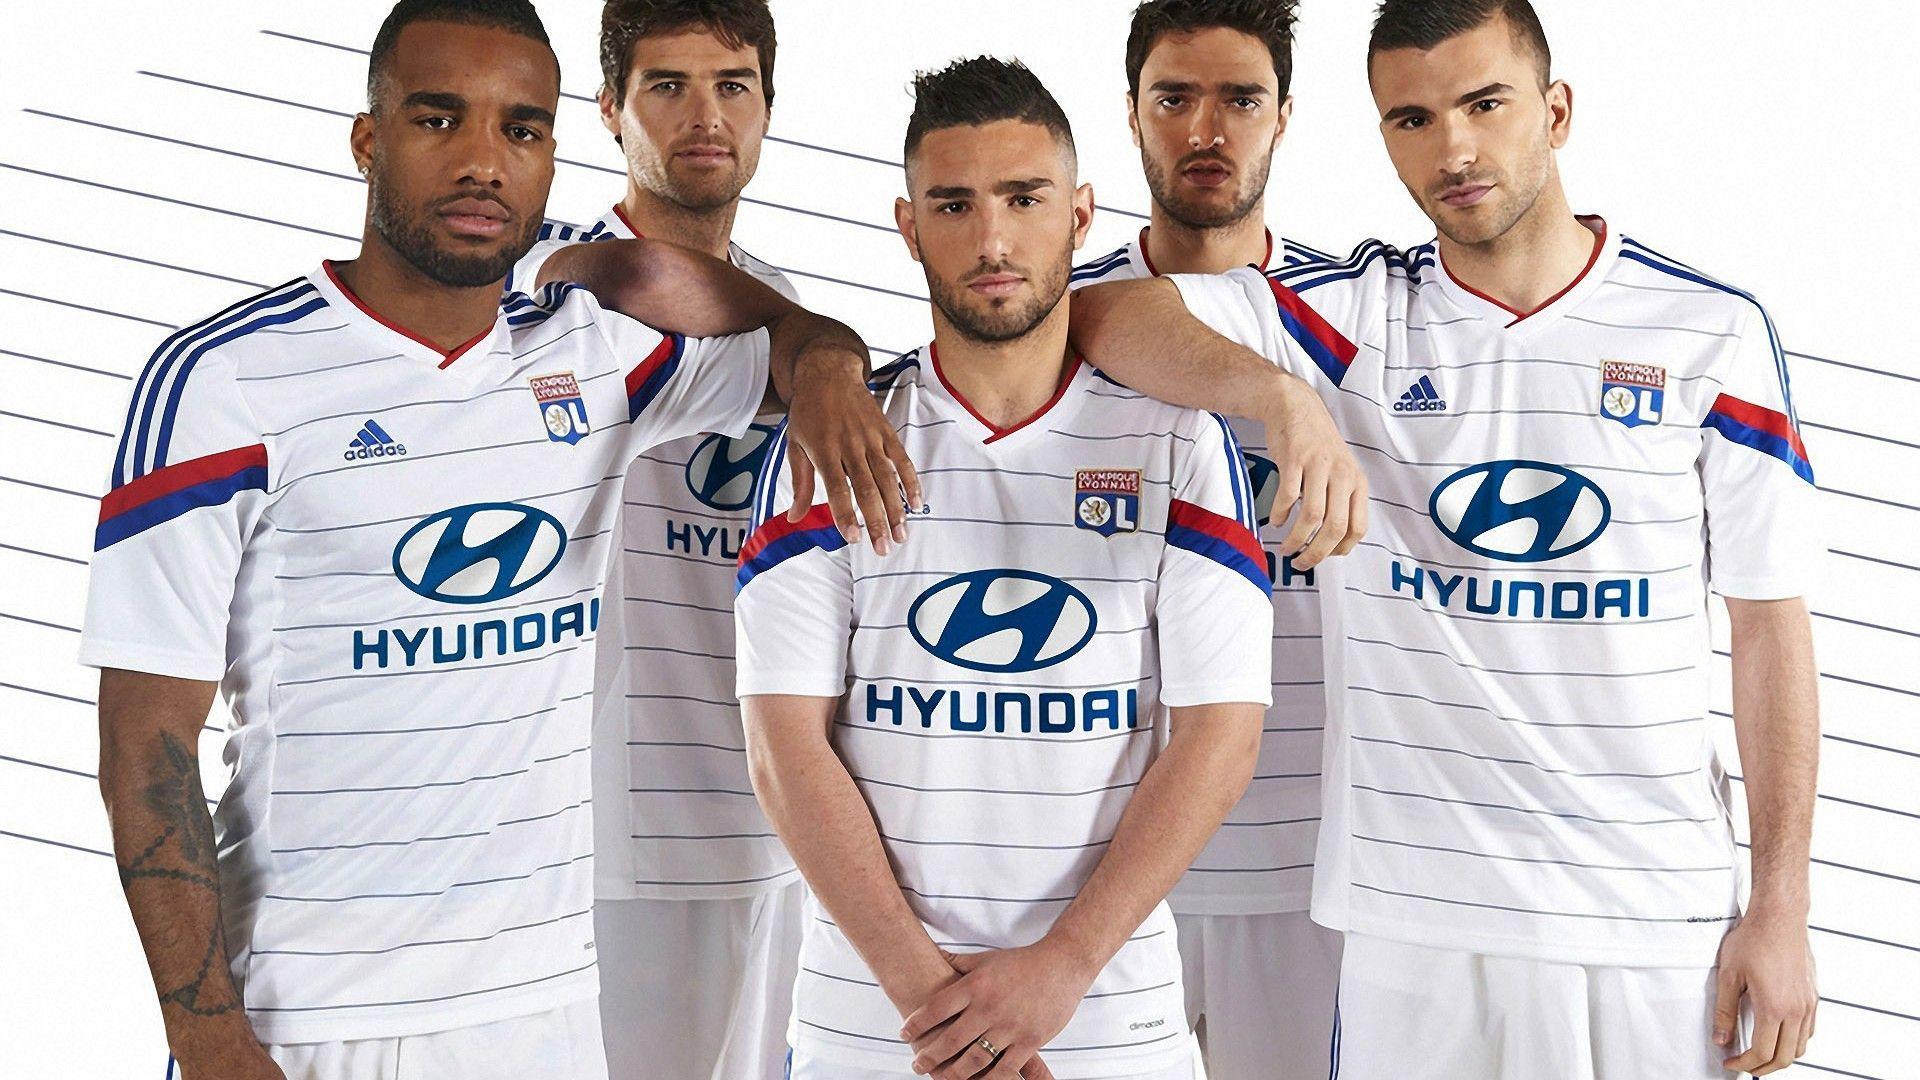 Olympique Lyonnais Jersey 2014 2015 Adidas Home Kit Wallpapers Wide